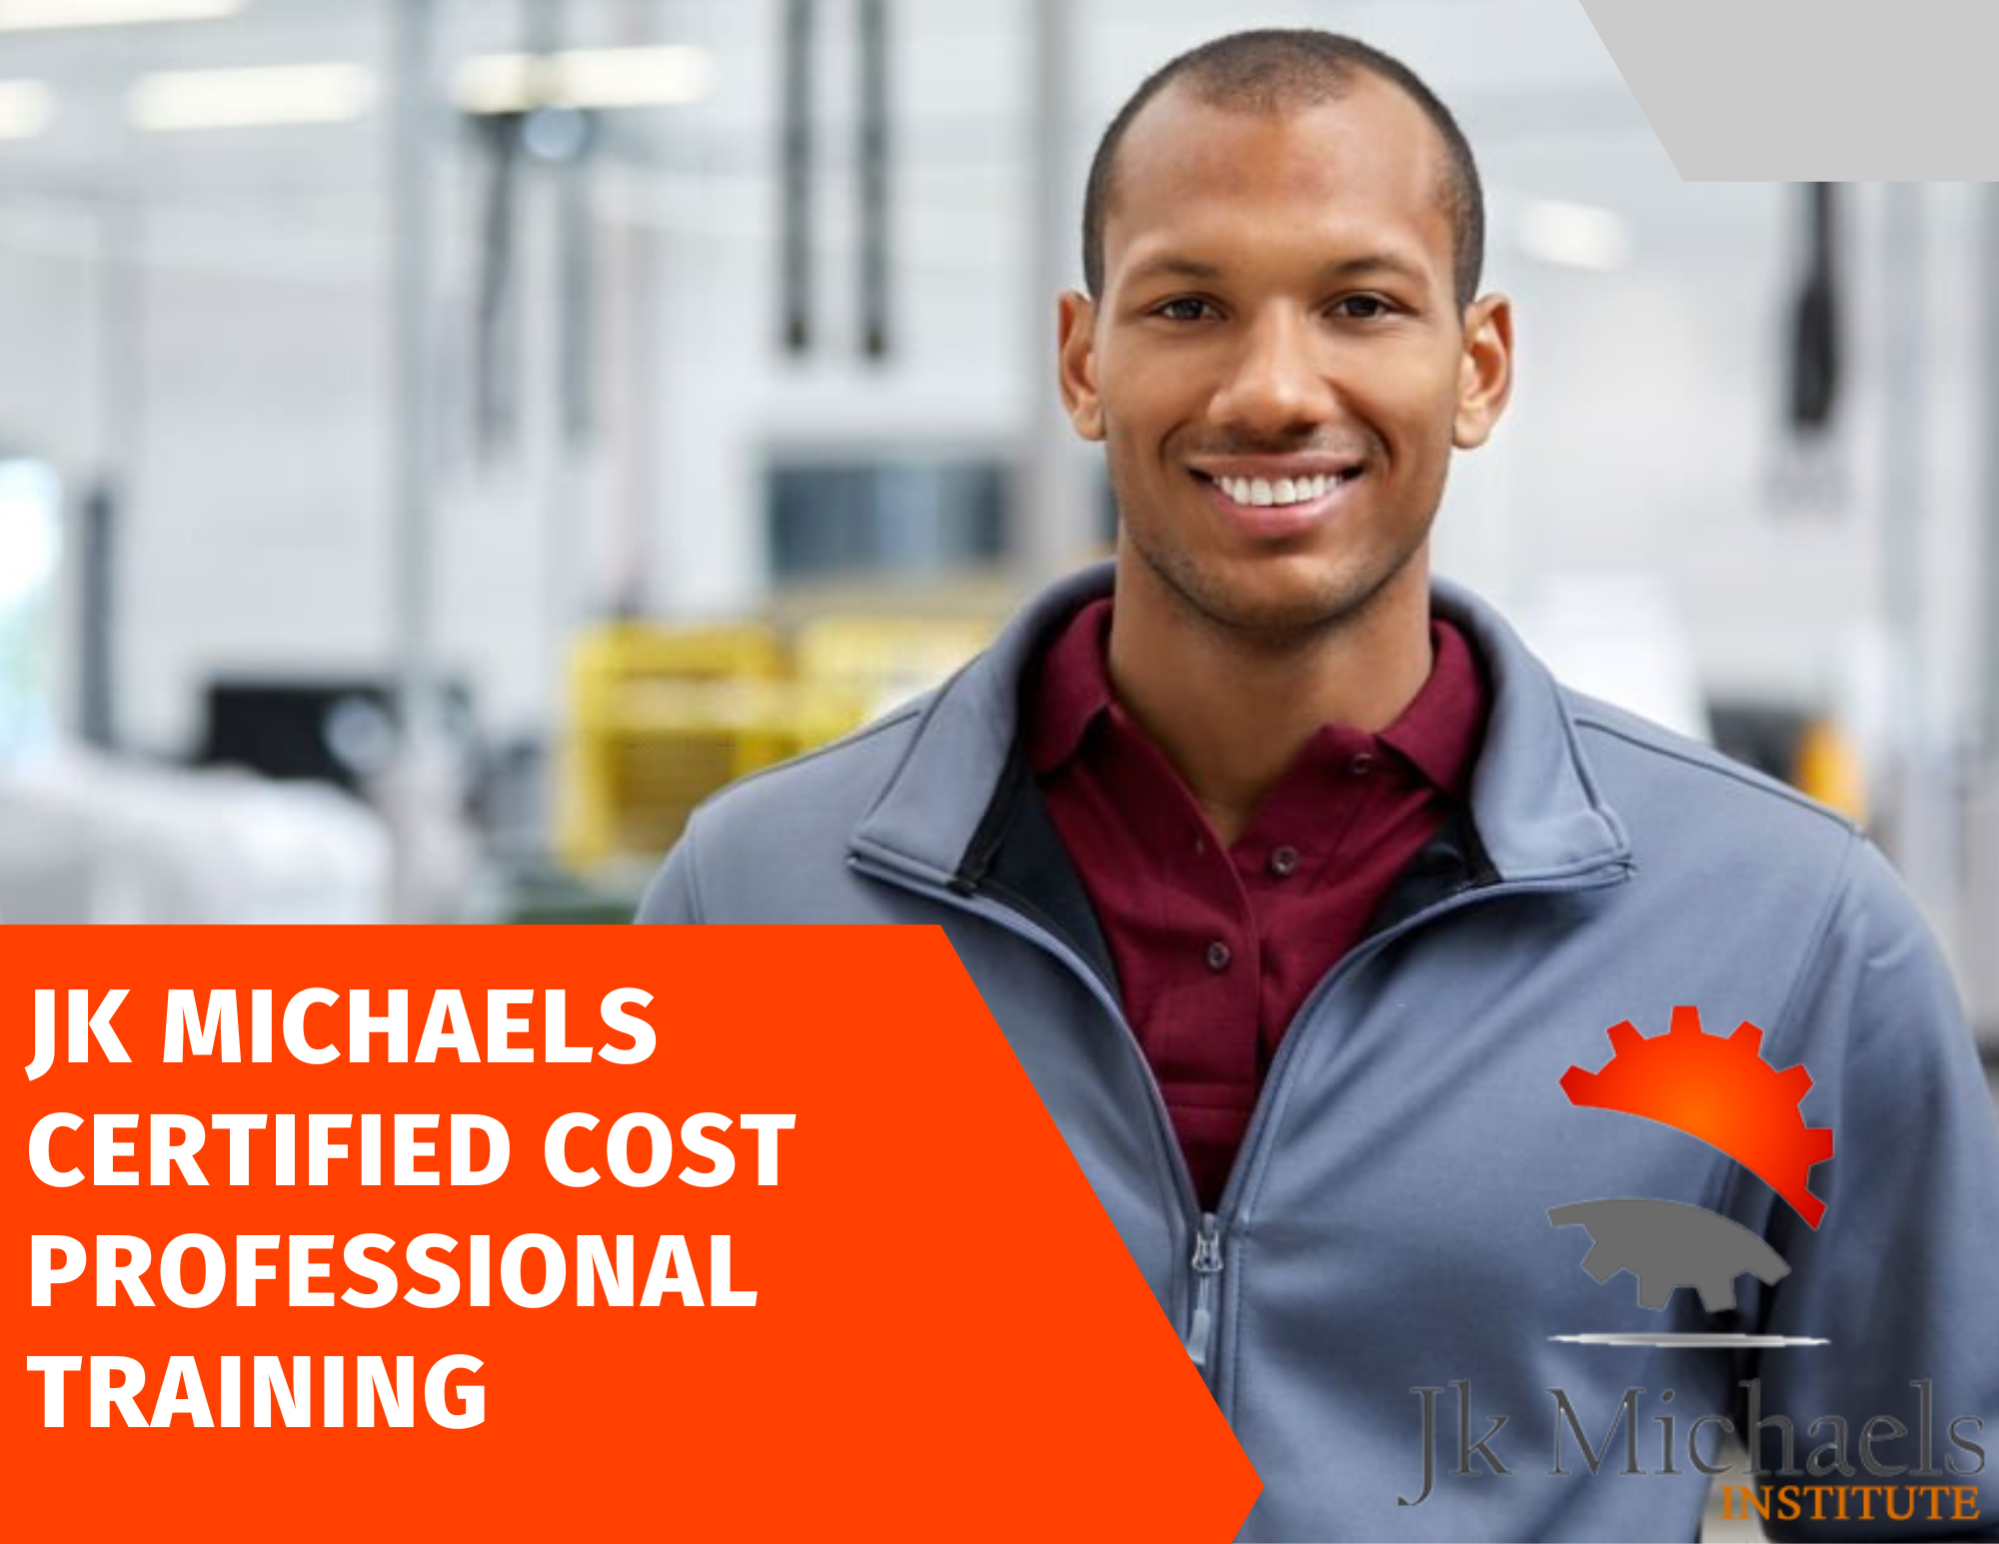 CERTIFIED COST PROFESSIONAL TRAINING